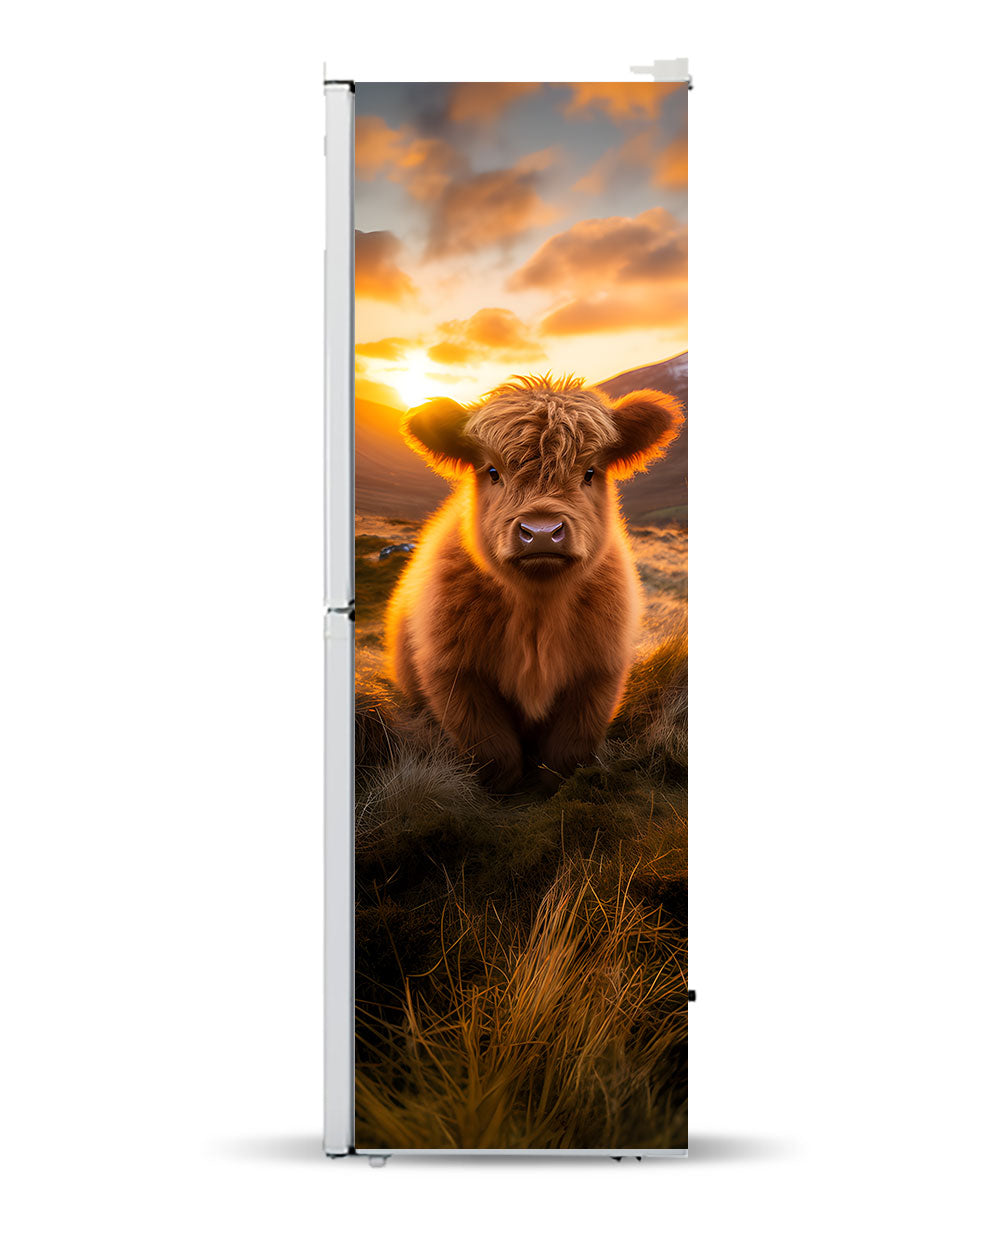 Highland Cow calf full cover magnet wrap – KUDUmagnets